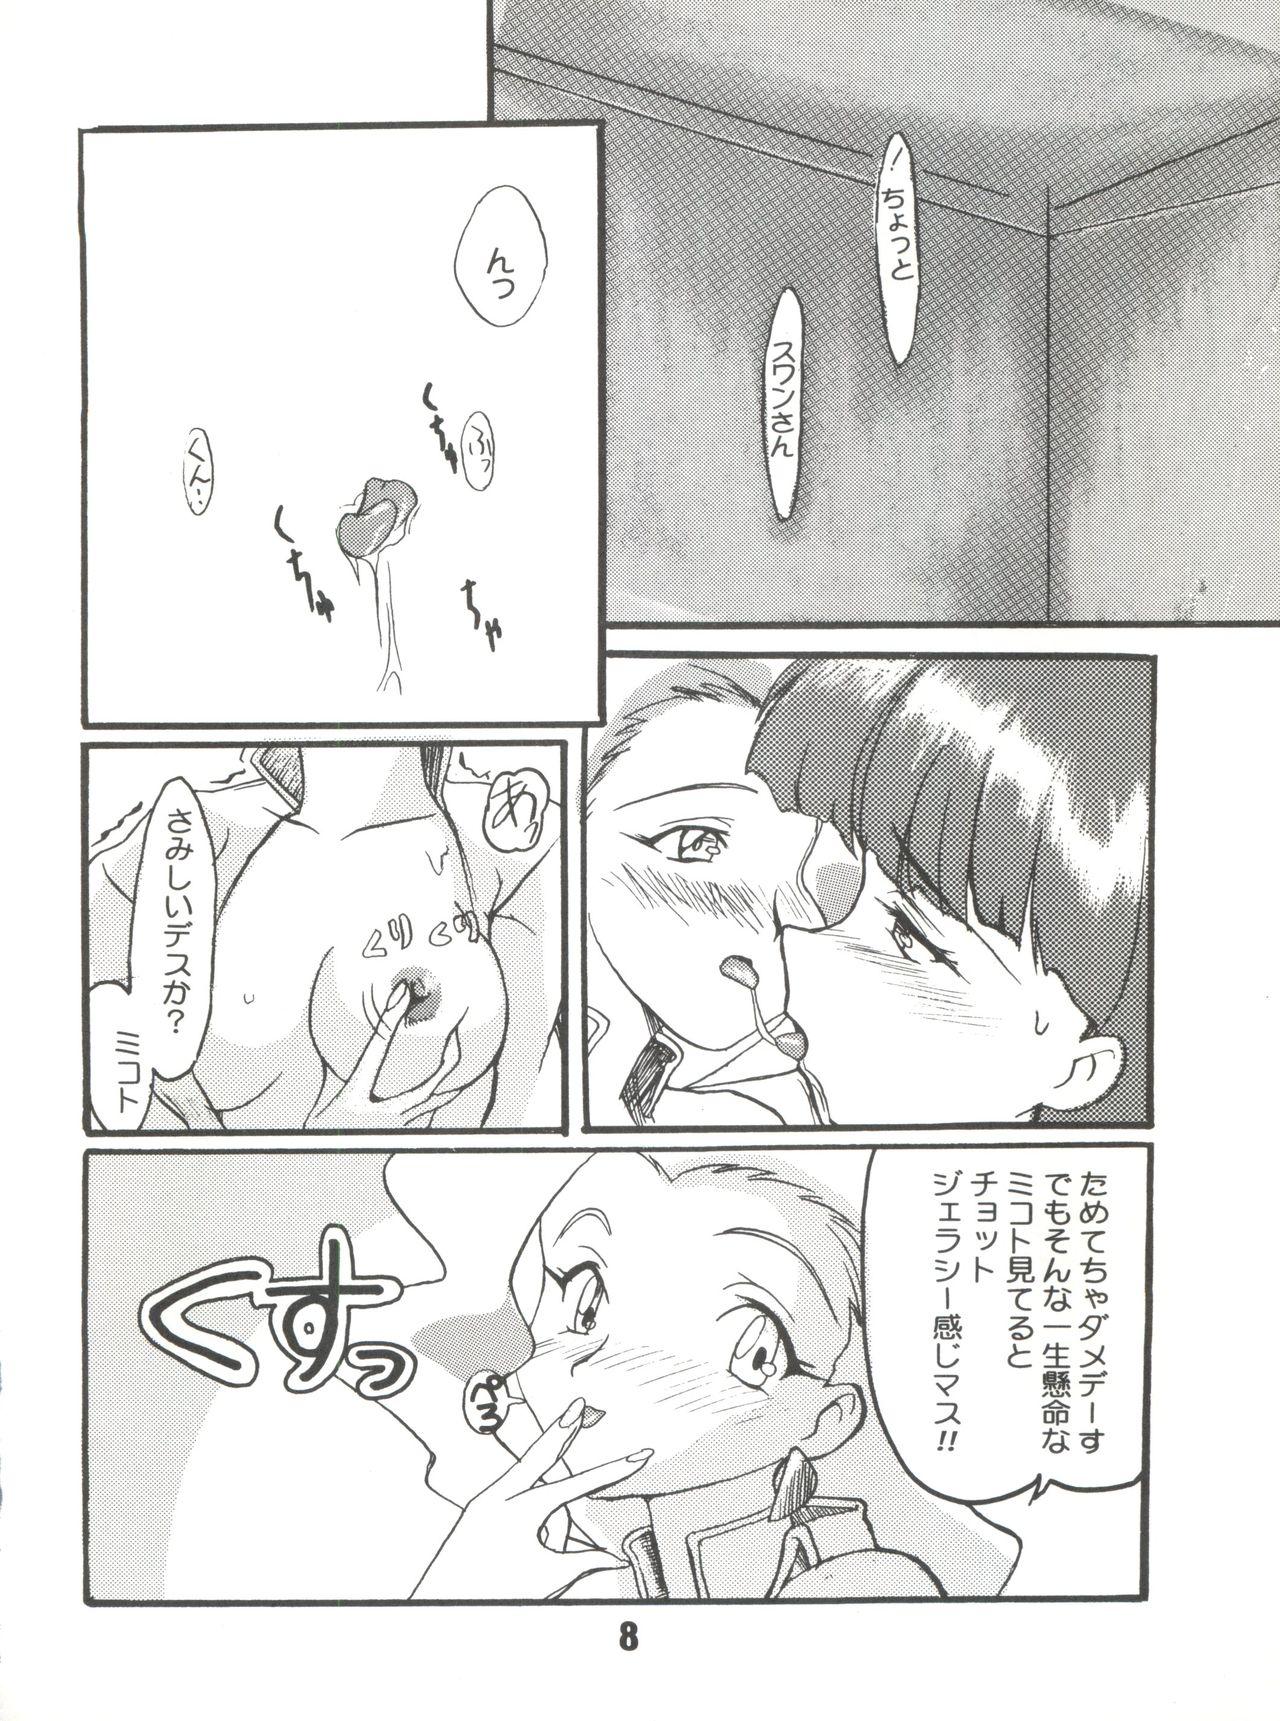 Gapes Gaping Asshole Sophia GGG - Gaogaigar African - Page 7